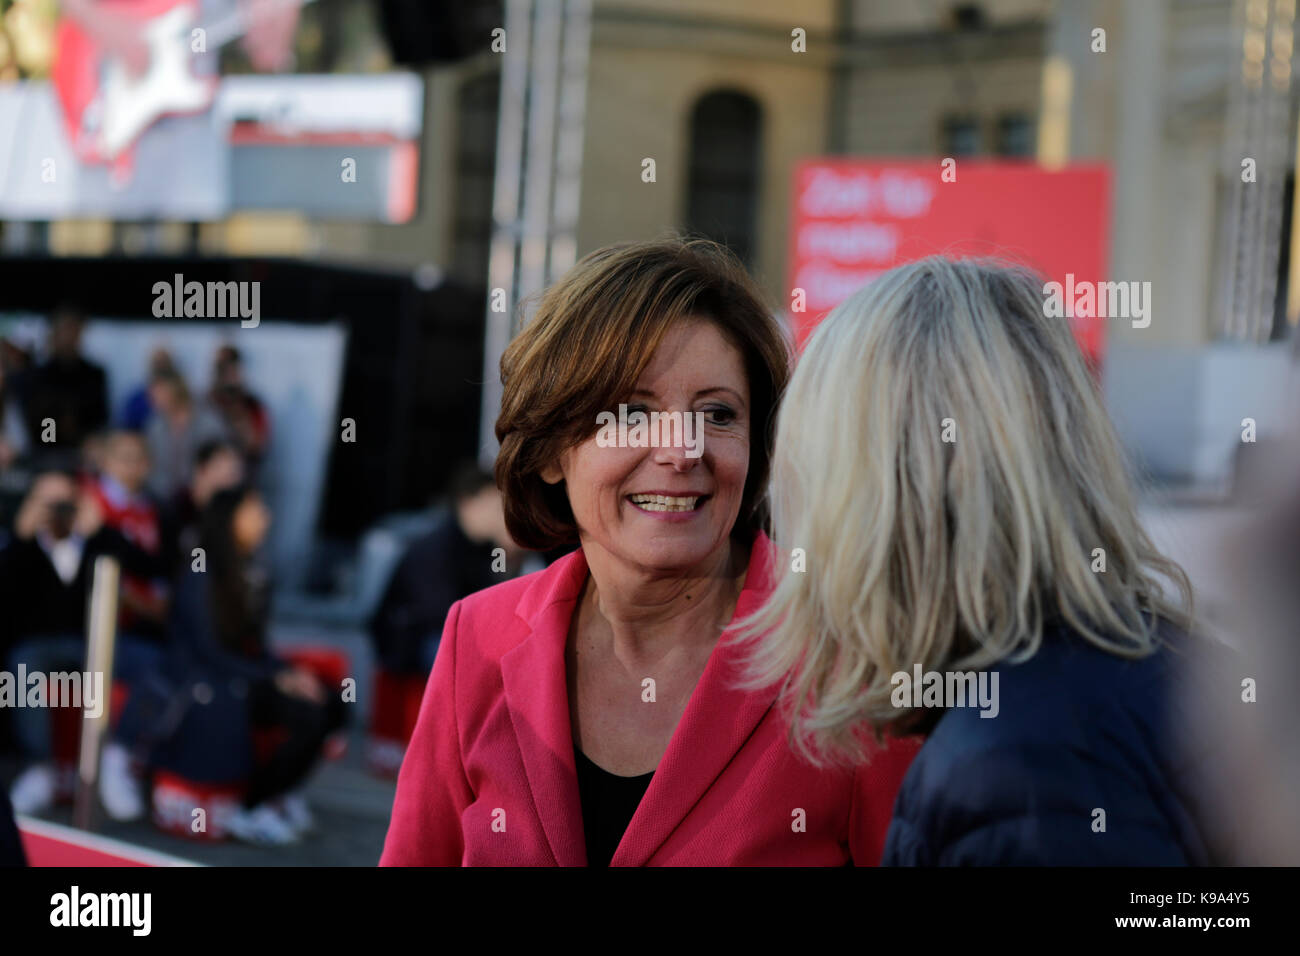 Berlin, Germany. 22nd Sep, 2017. Malu Dreyer, the Minister President of Rhineland-Palatinate, is pictured at the rally. The candidate for the German Chancellorship of the SPD (Social Democratic Party of Germany) was the main speaker at a large rally in the centre of Berlin, two days ahead of the German General Election. Credit: SOPA Images Limited/Alamy Live News Stock Photo